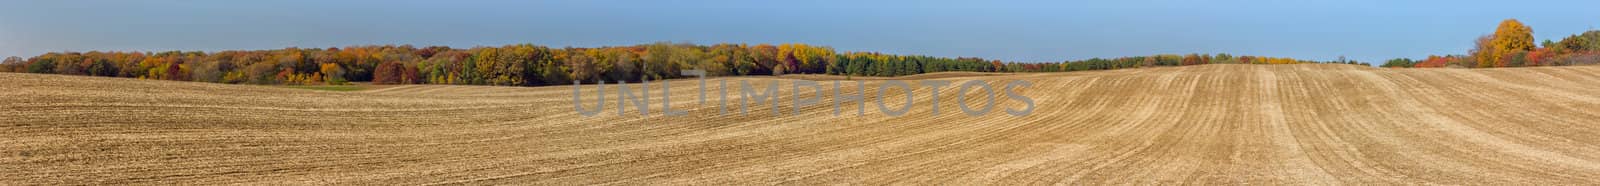 Plowed Field Panorama by wolterk